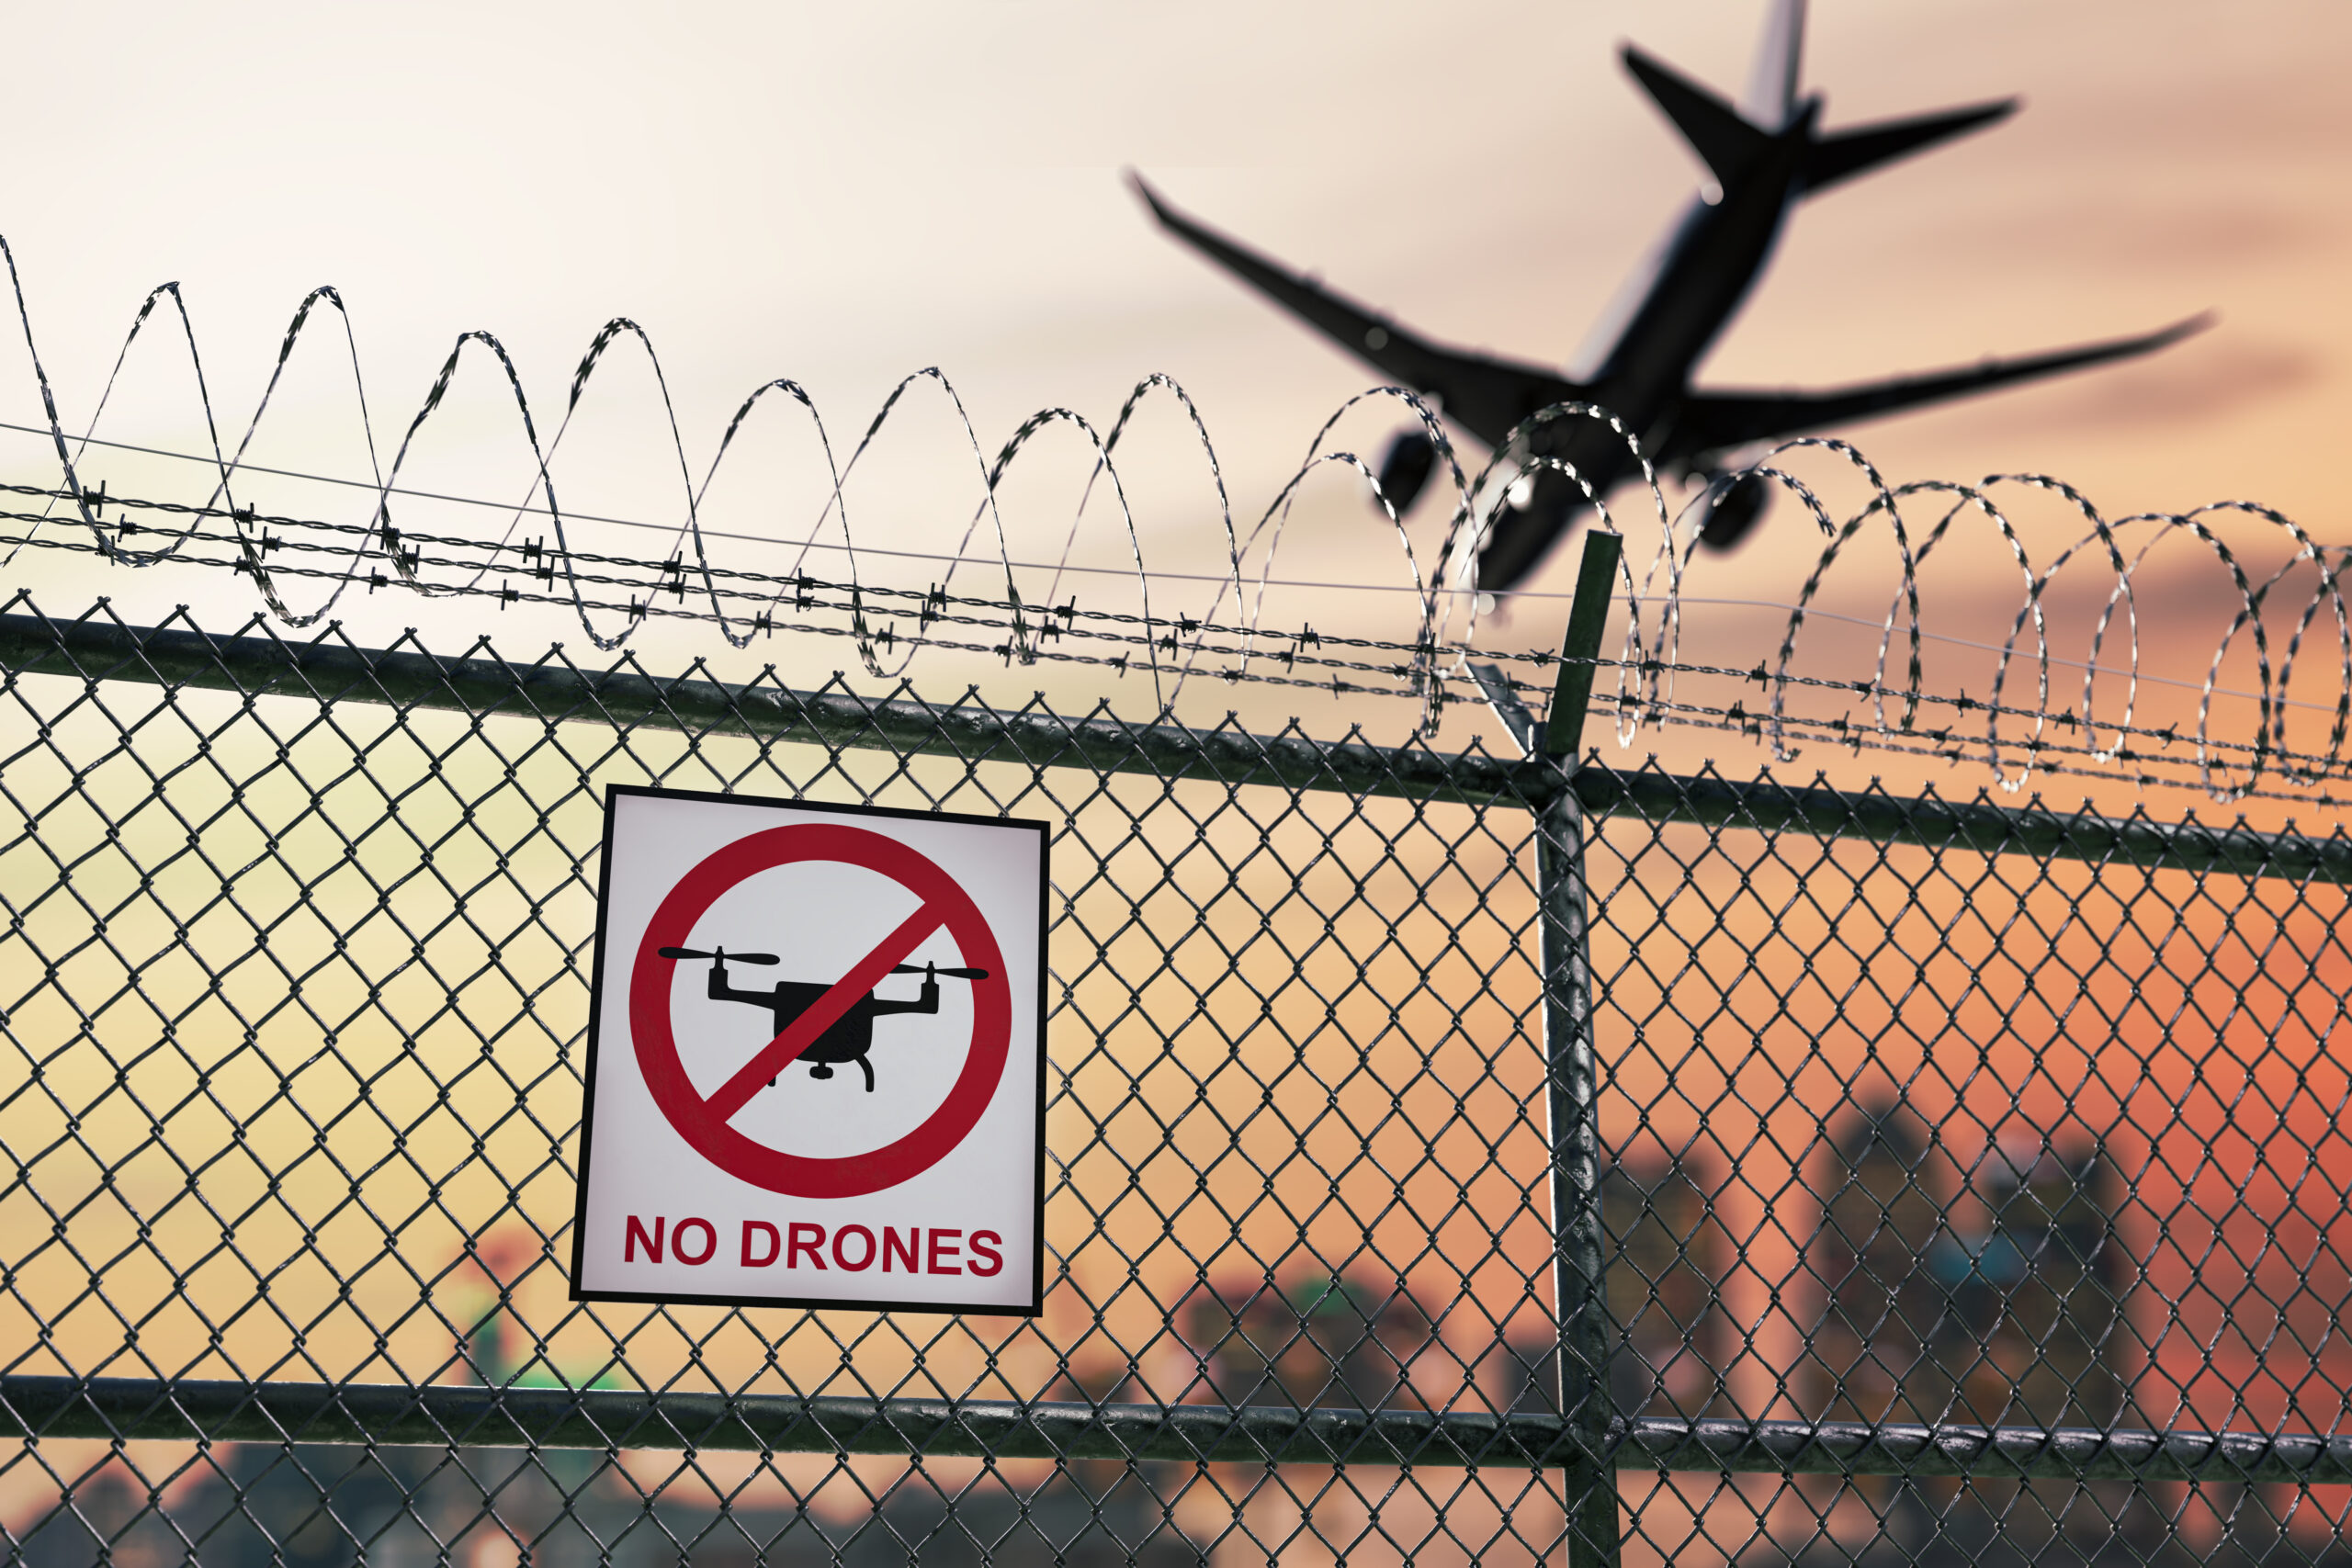 Drones not allowed